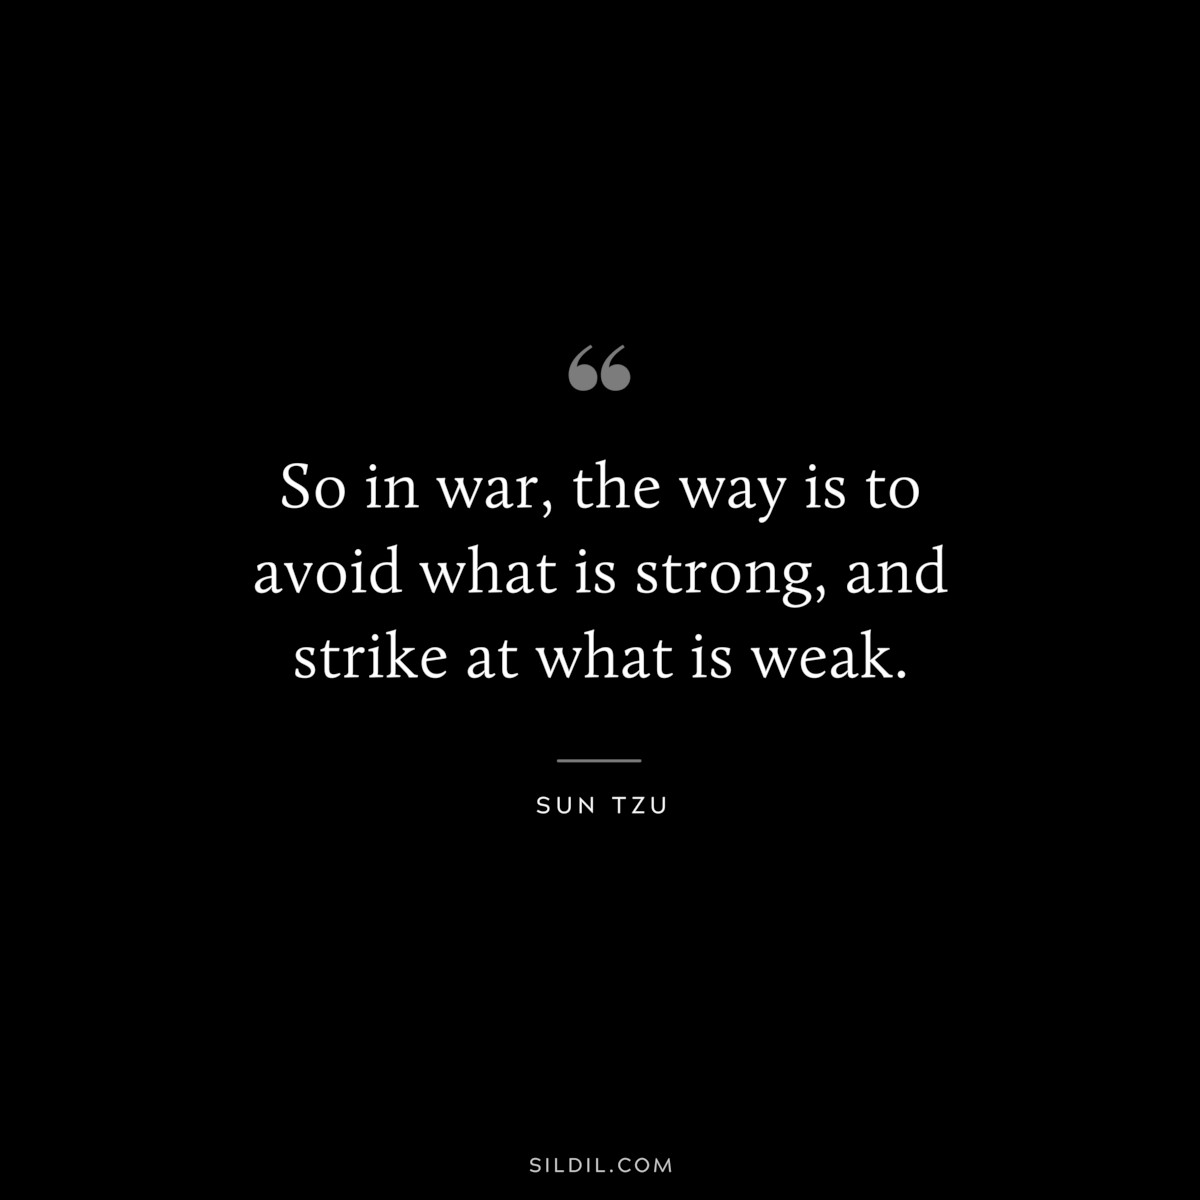 So in war, the way is to avoid what is strong, and strike at what is weak.― Sun Tzu